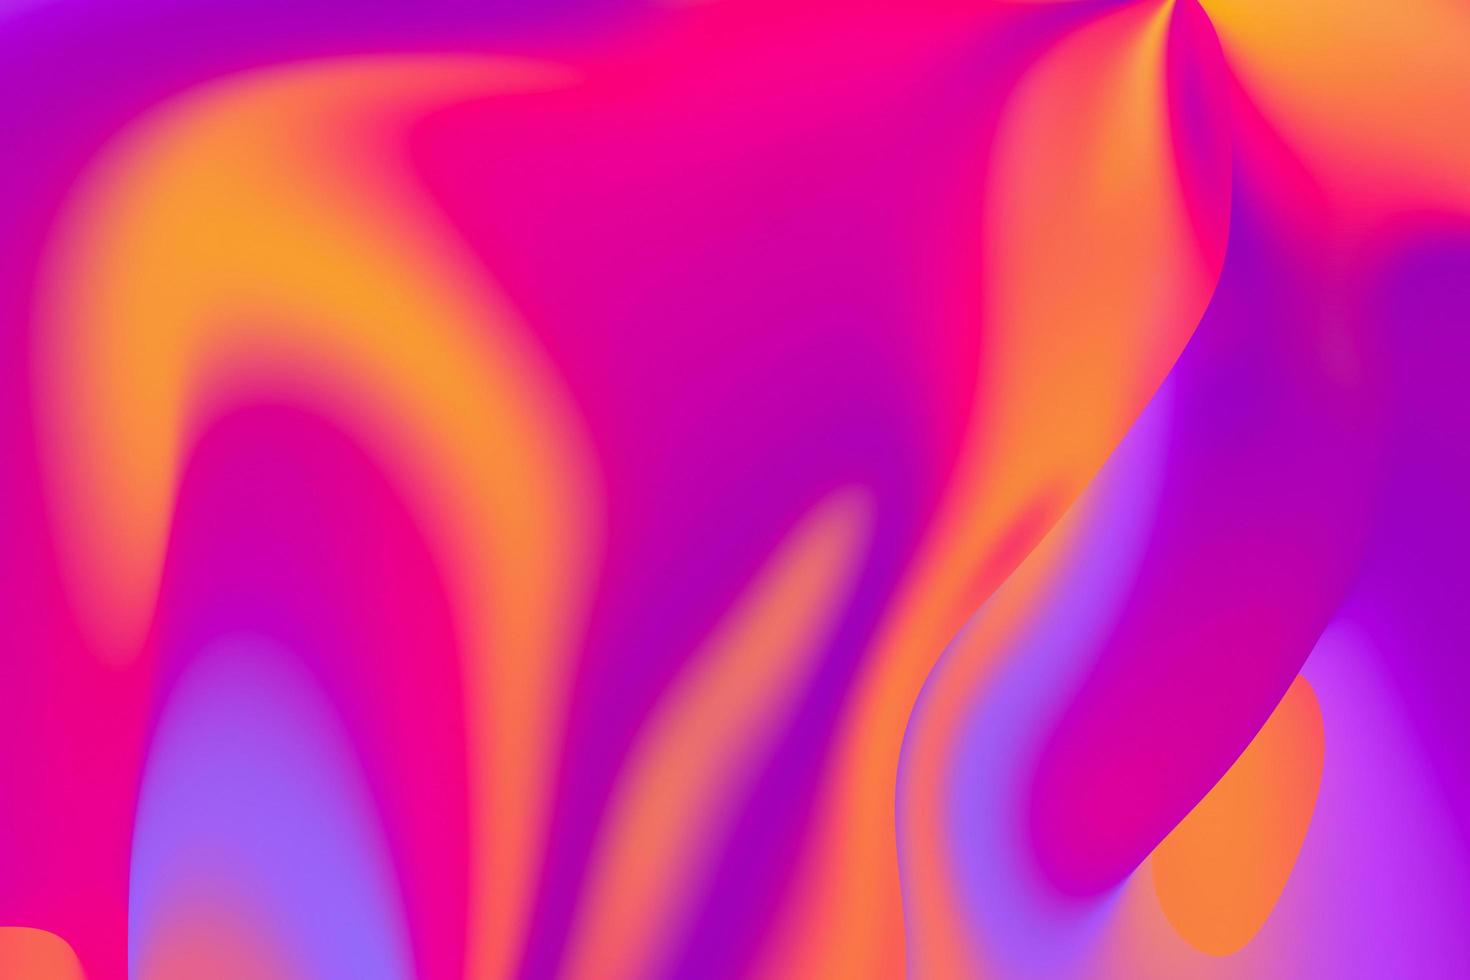 Abstract smooth liquid gradient 3d background. Flowing violet and yellow fluid surface photo